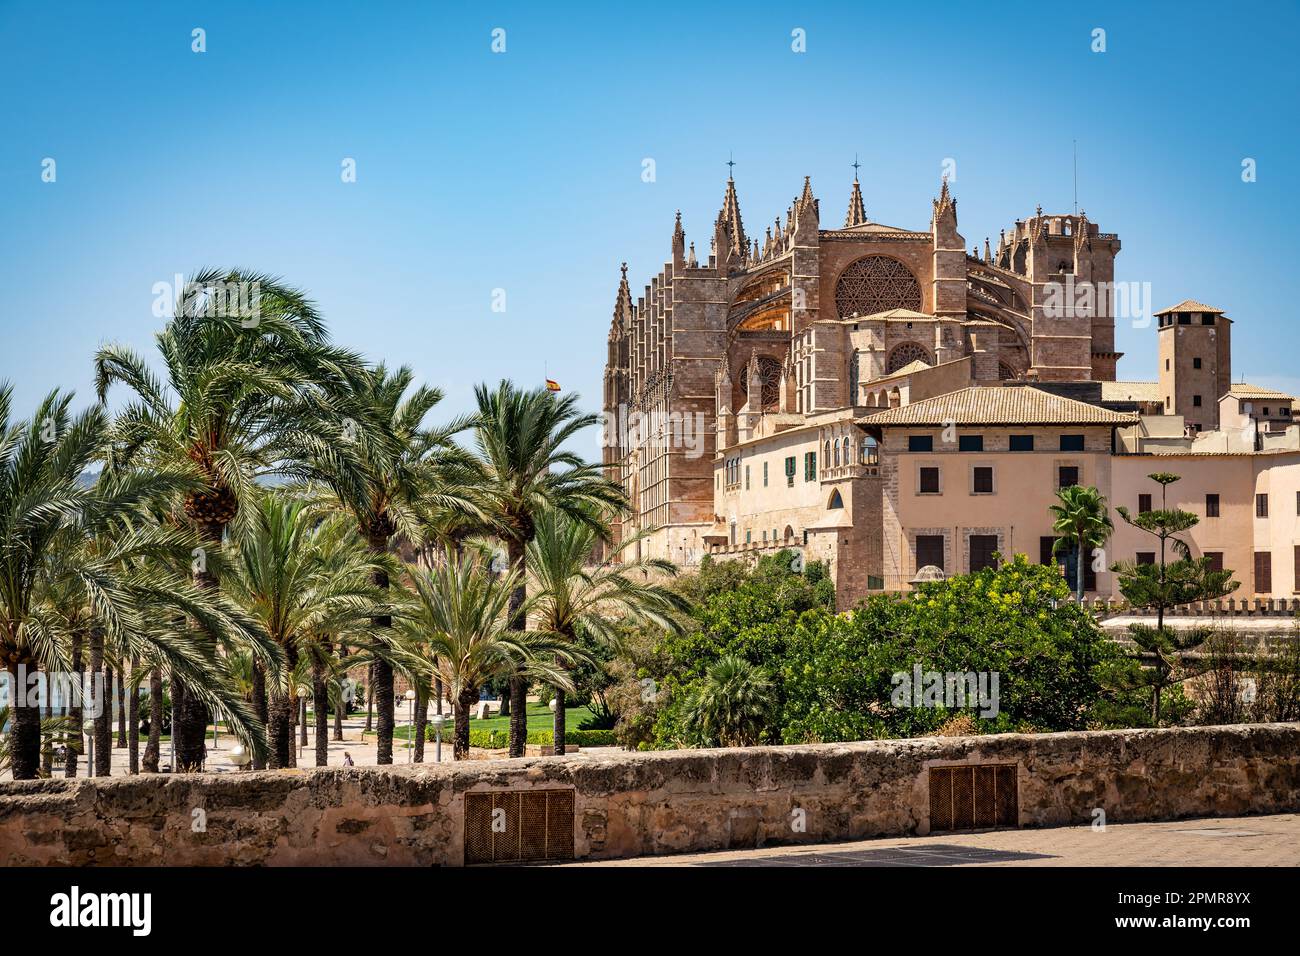 Rear view of The Cathedral of Santa Maria of Palma with palm trees Stock Photo